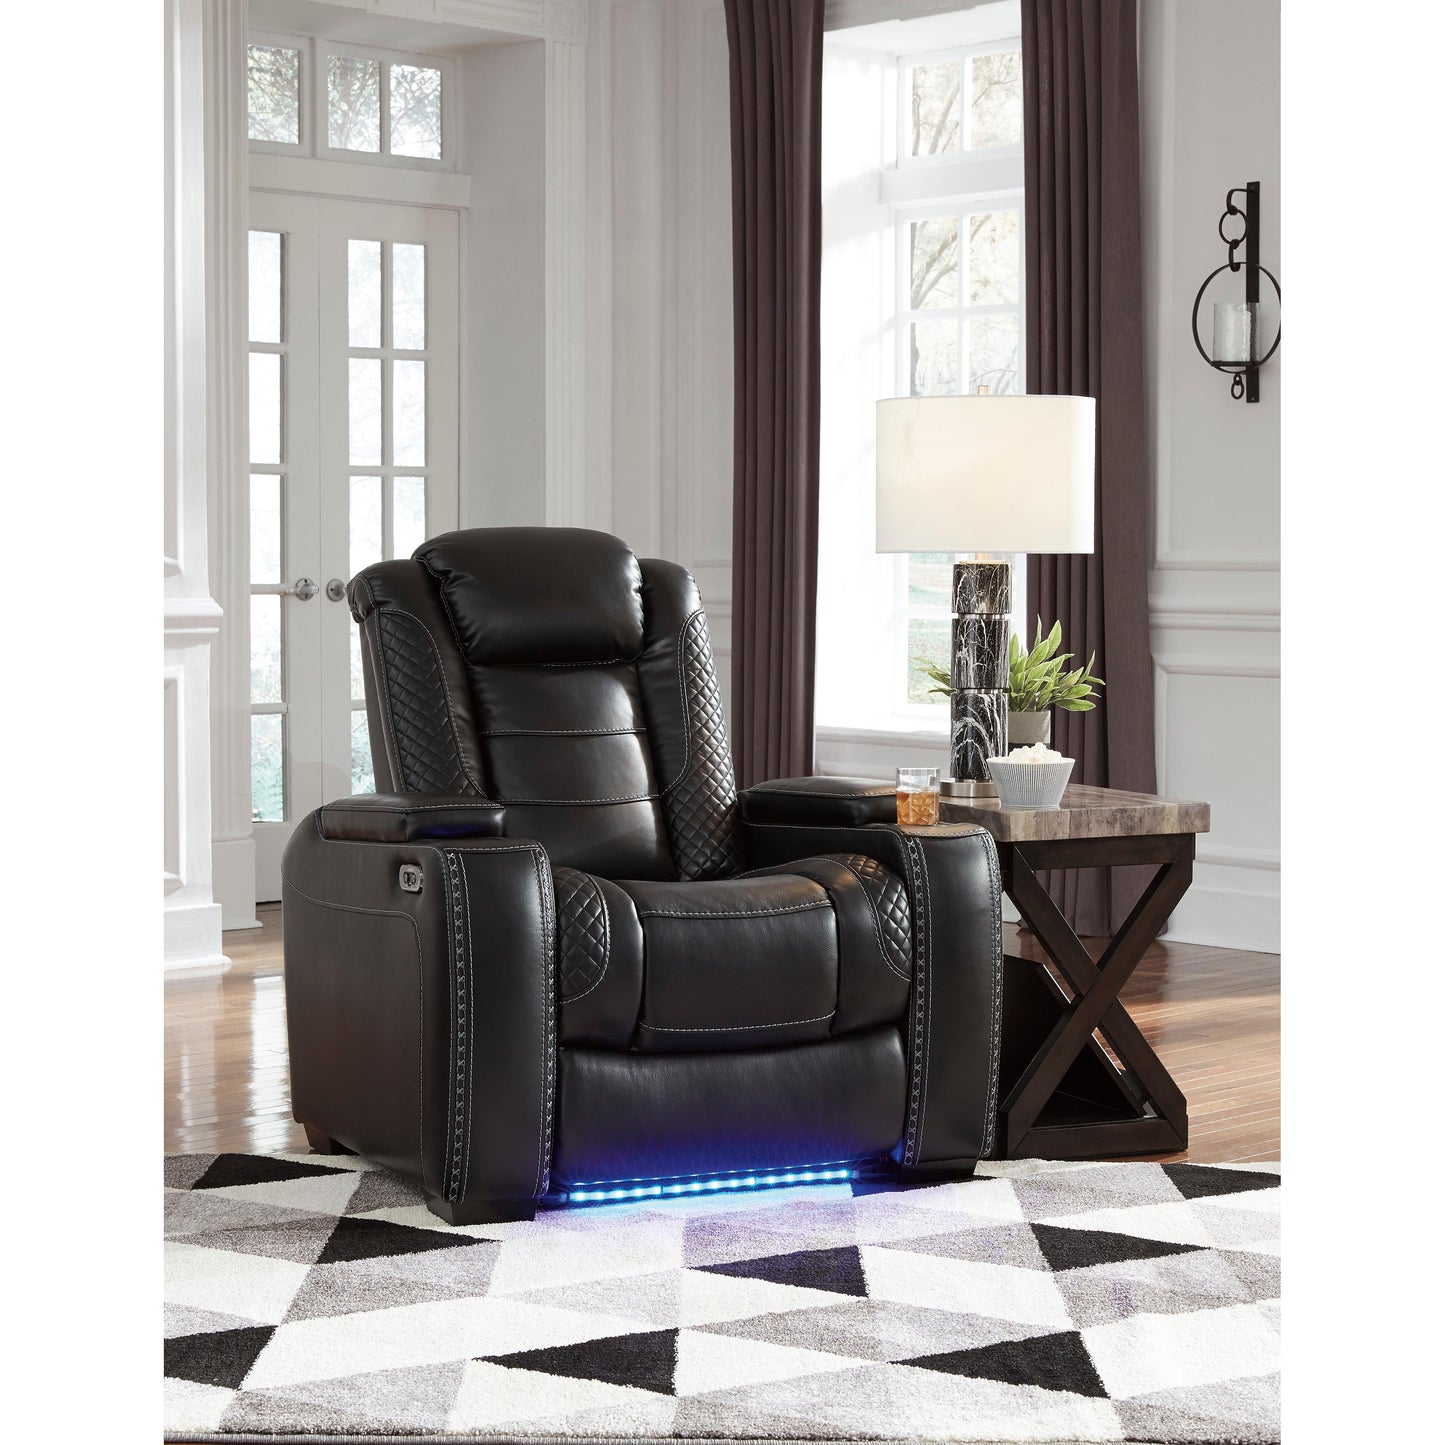 Signature Design by Ashley Party Time Power Leather Look Recliner 3700313